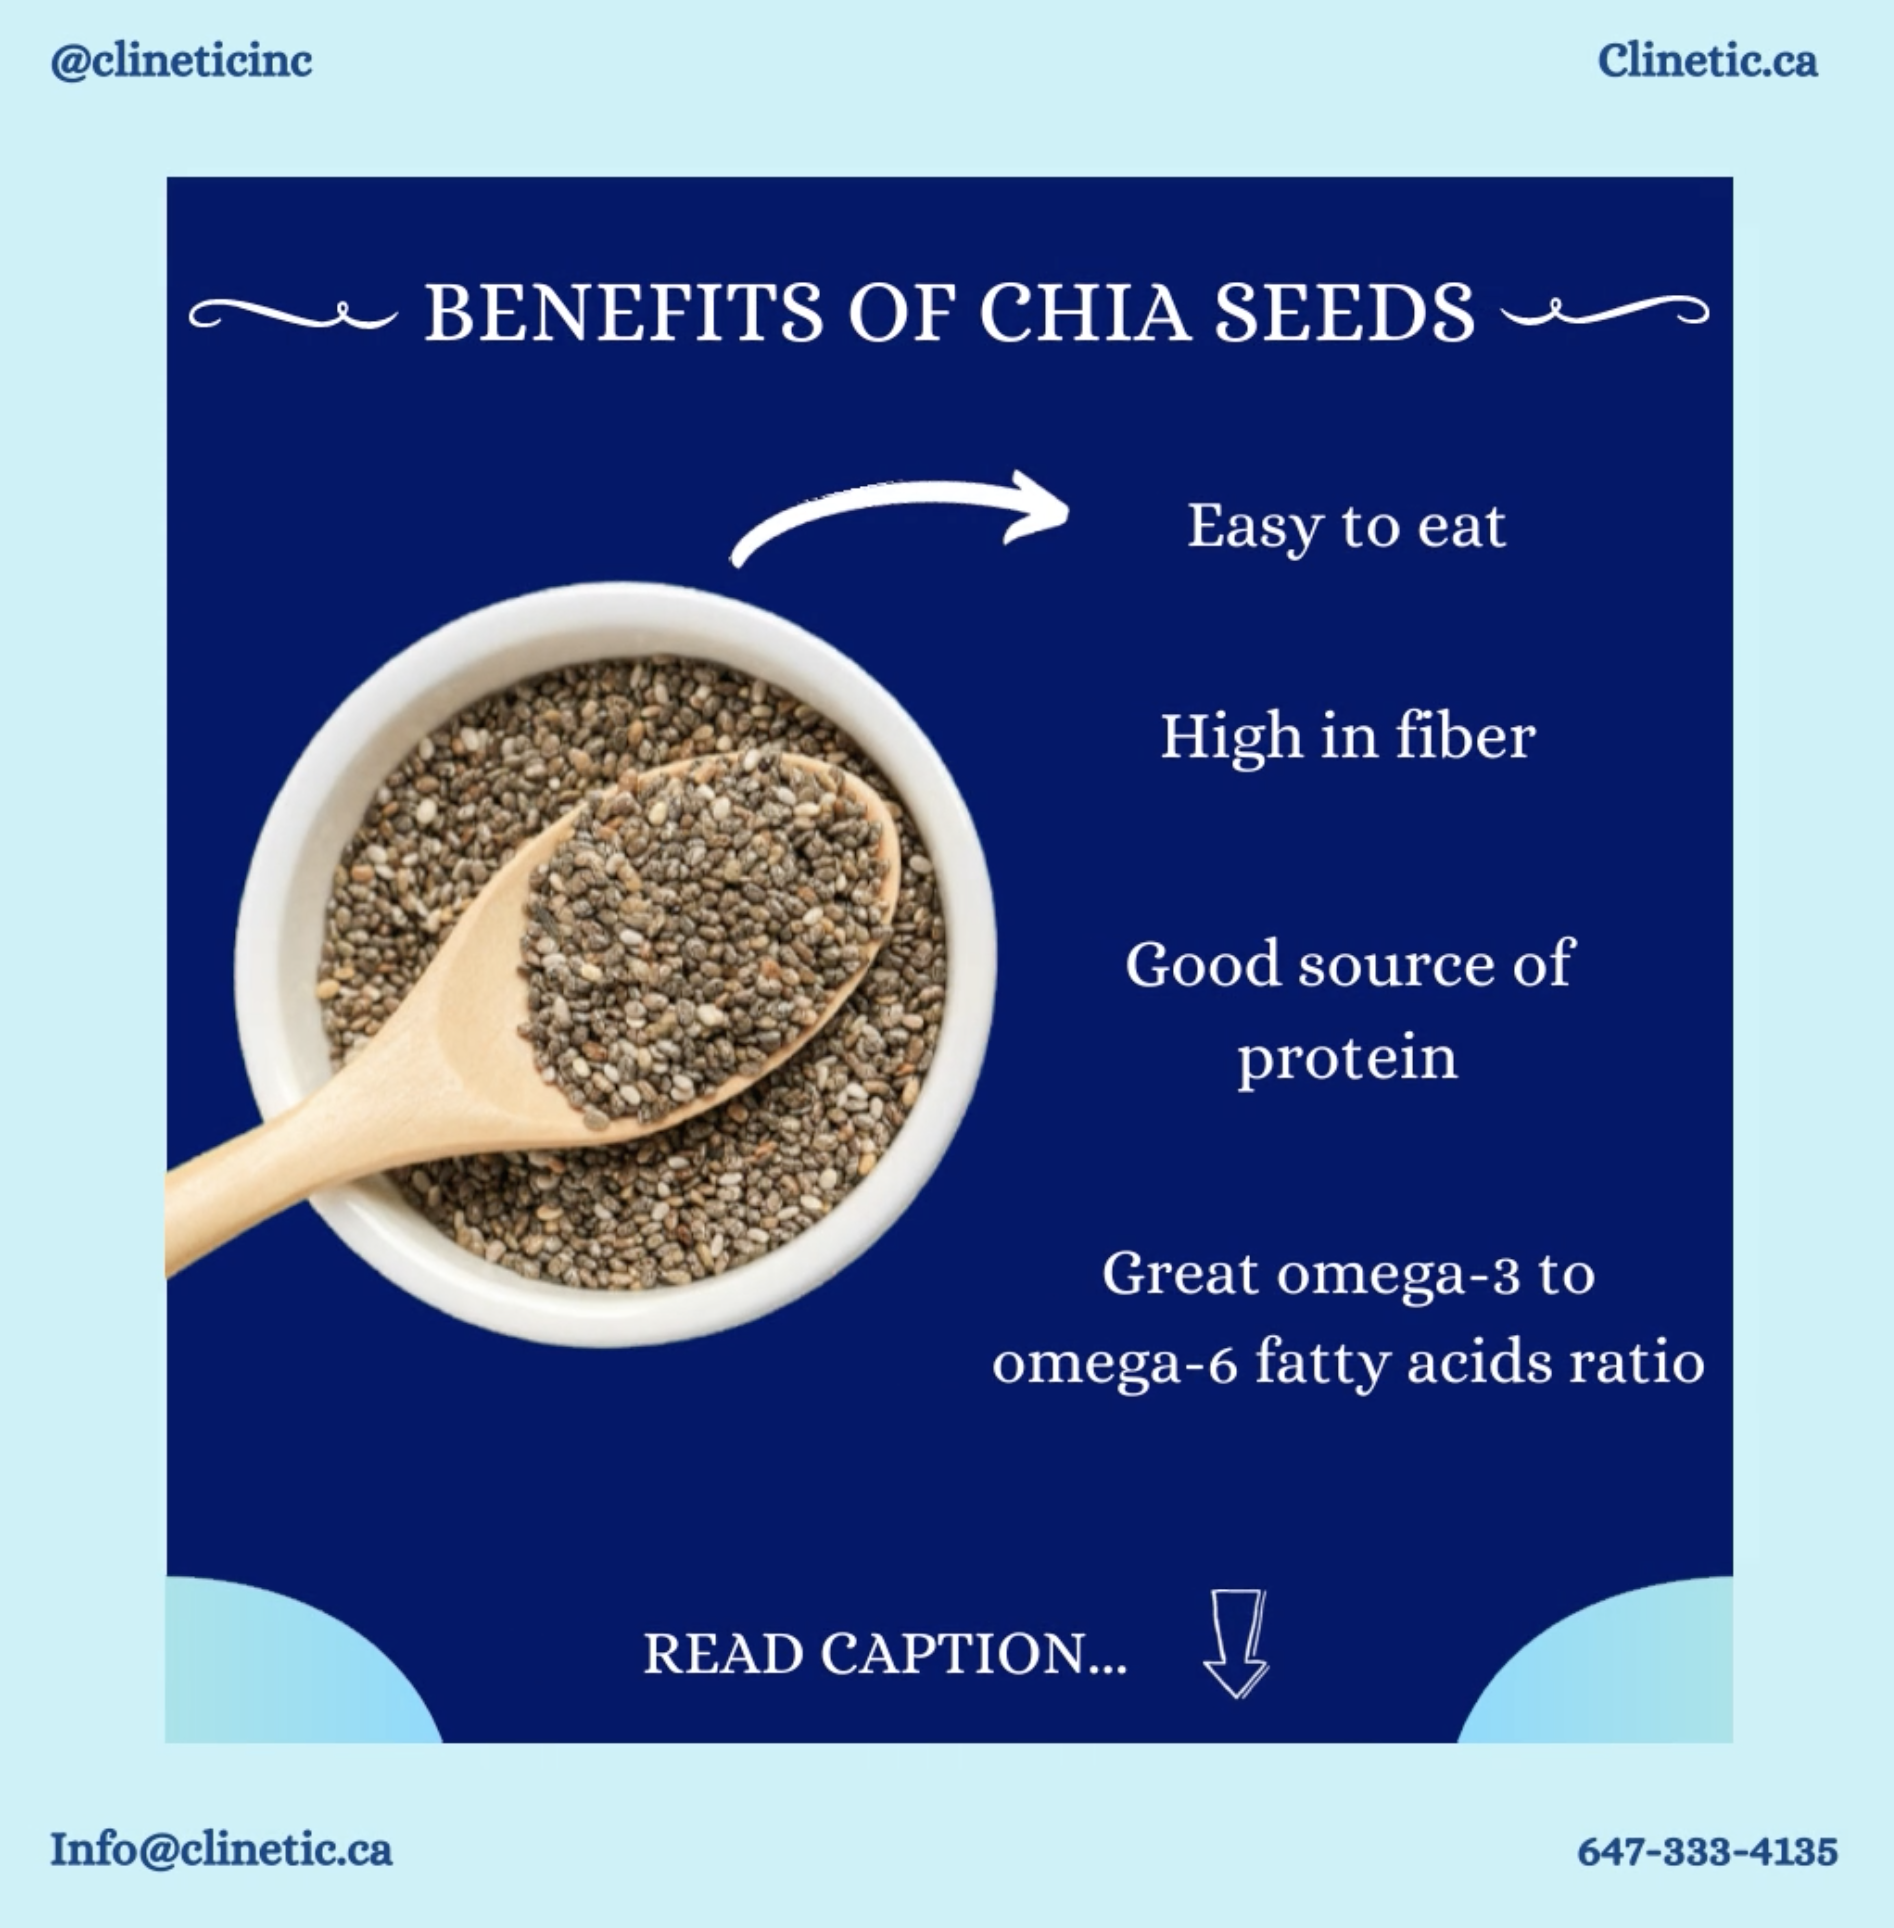 BENEFITS OF CHIA SEEDS